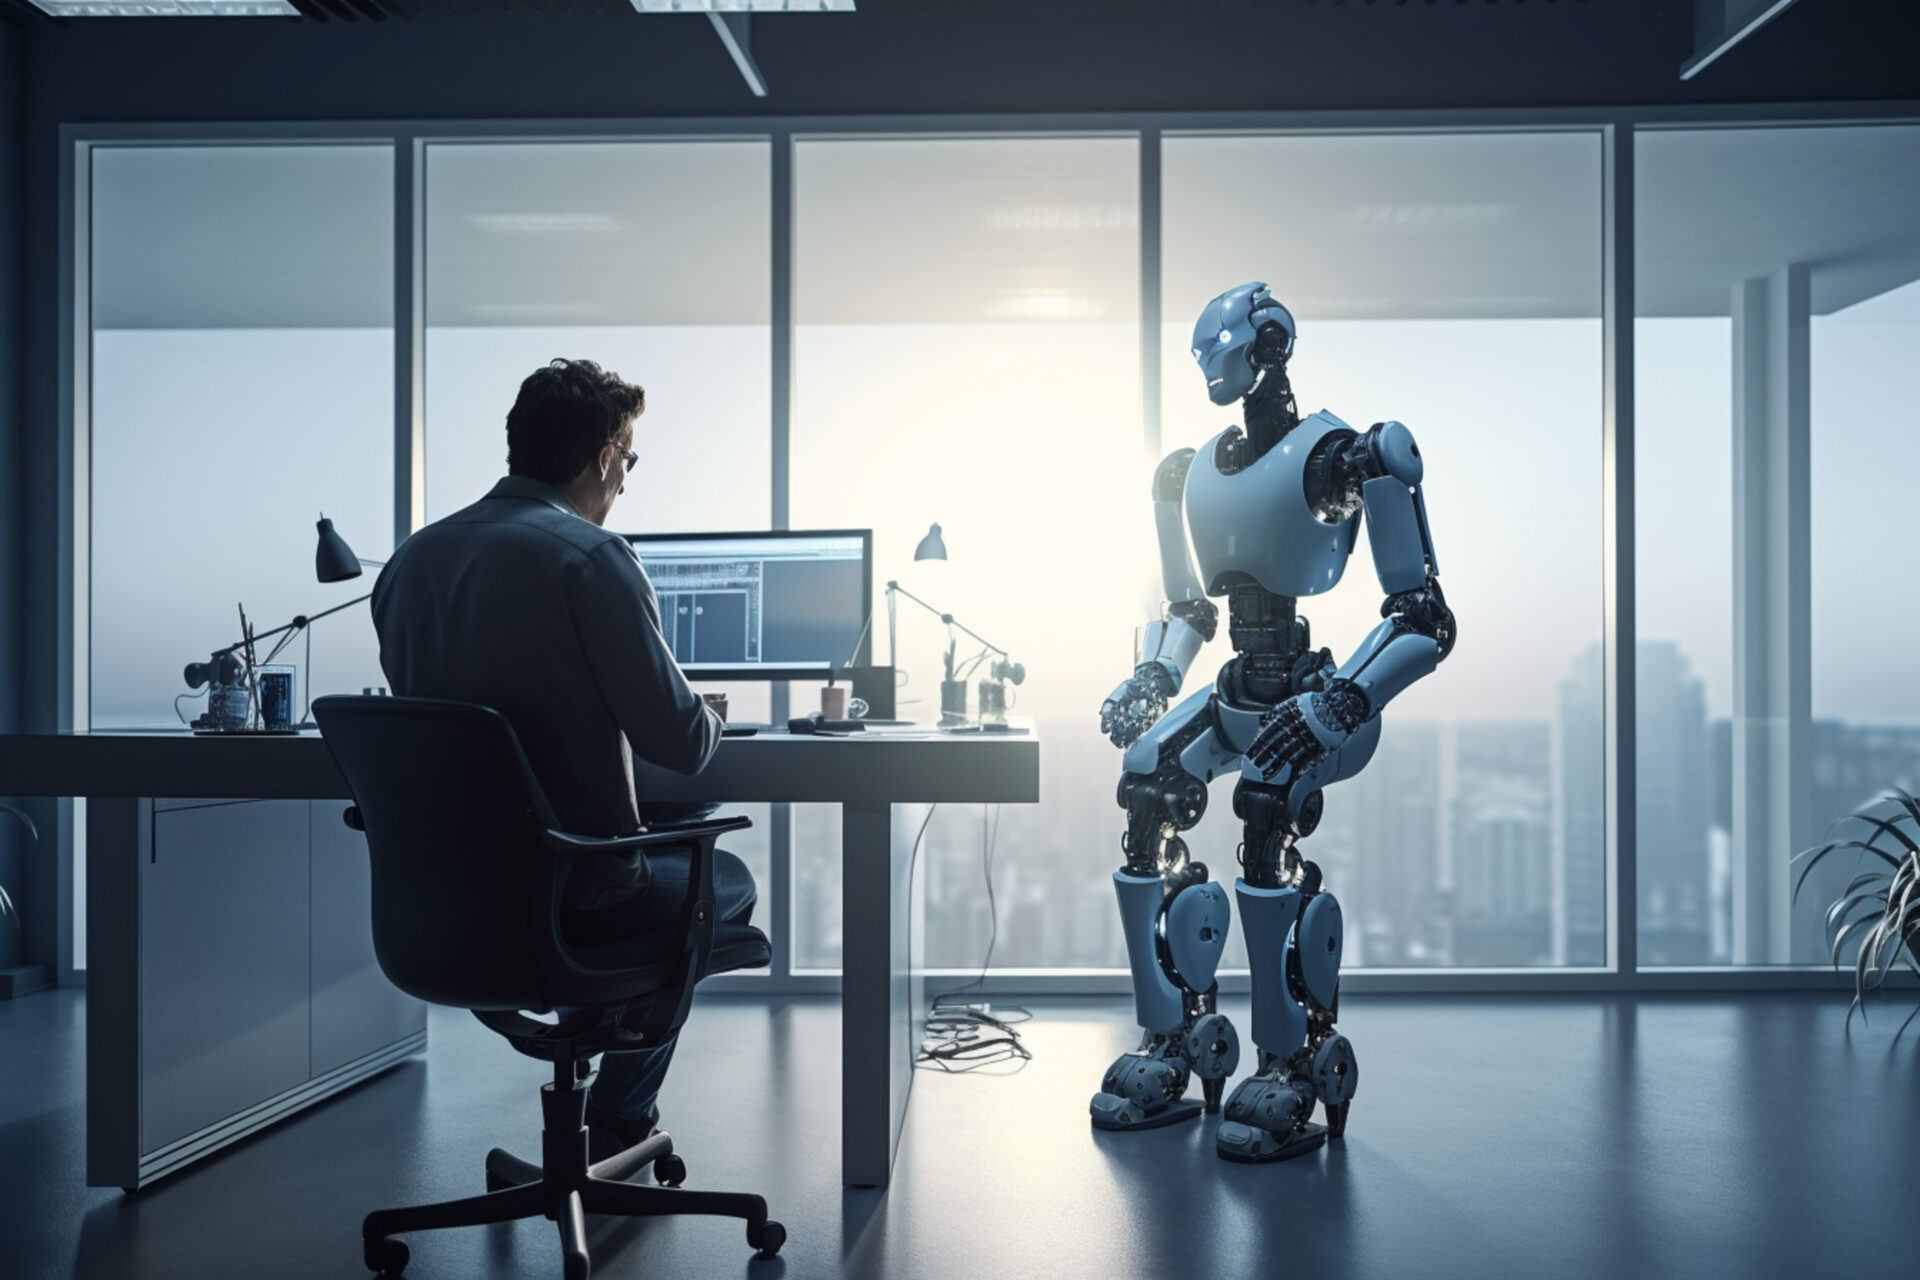 AI artificial intelligence or humanoid robot talking to human Consult and advise wisely project development generative AI.